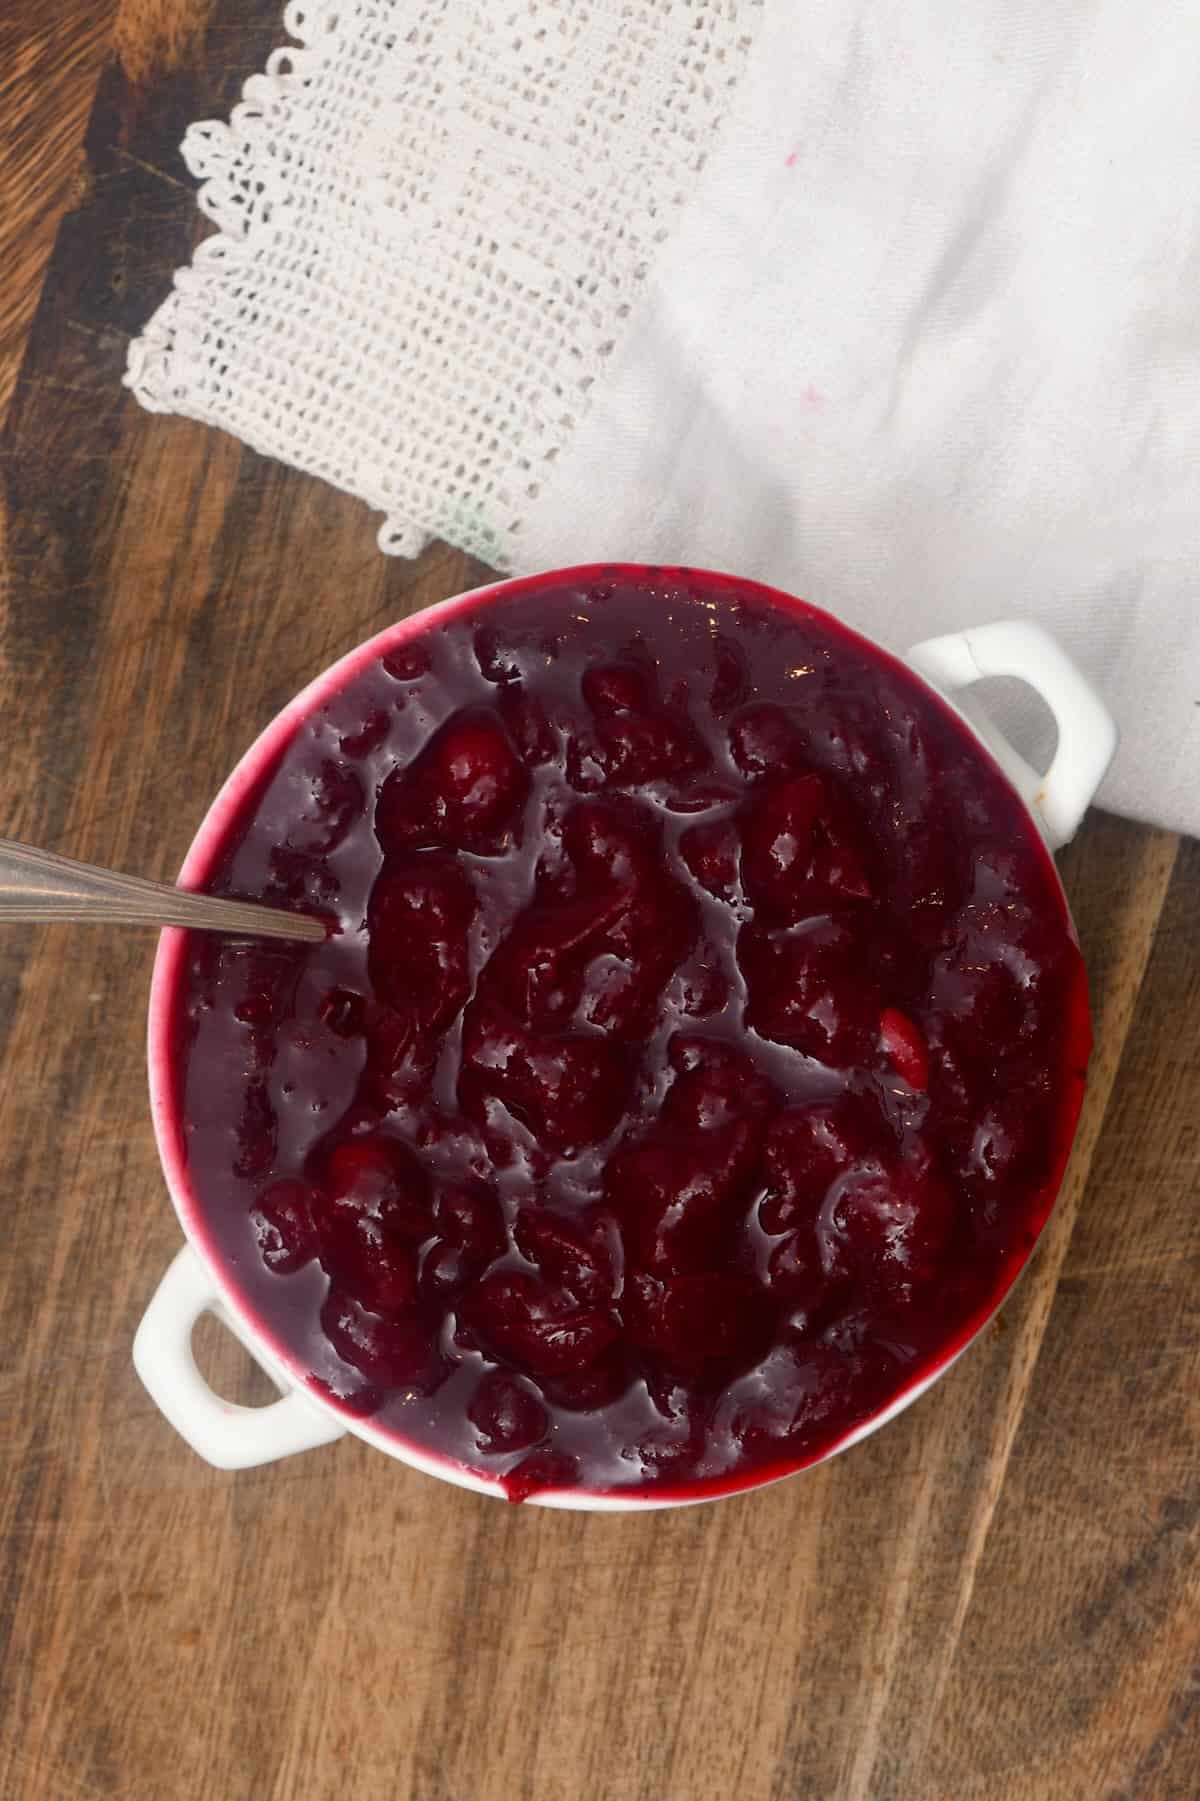 Homemade cranberry sauce in a bowl